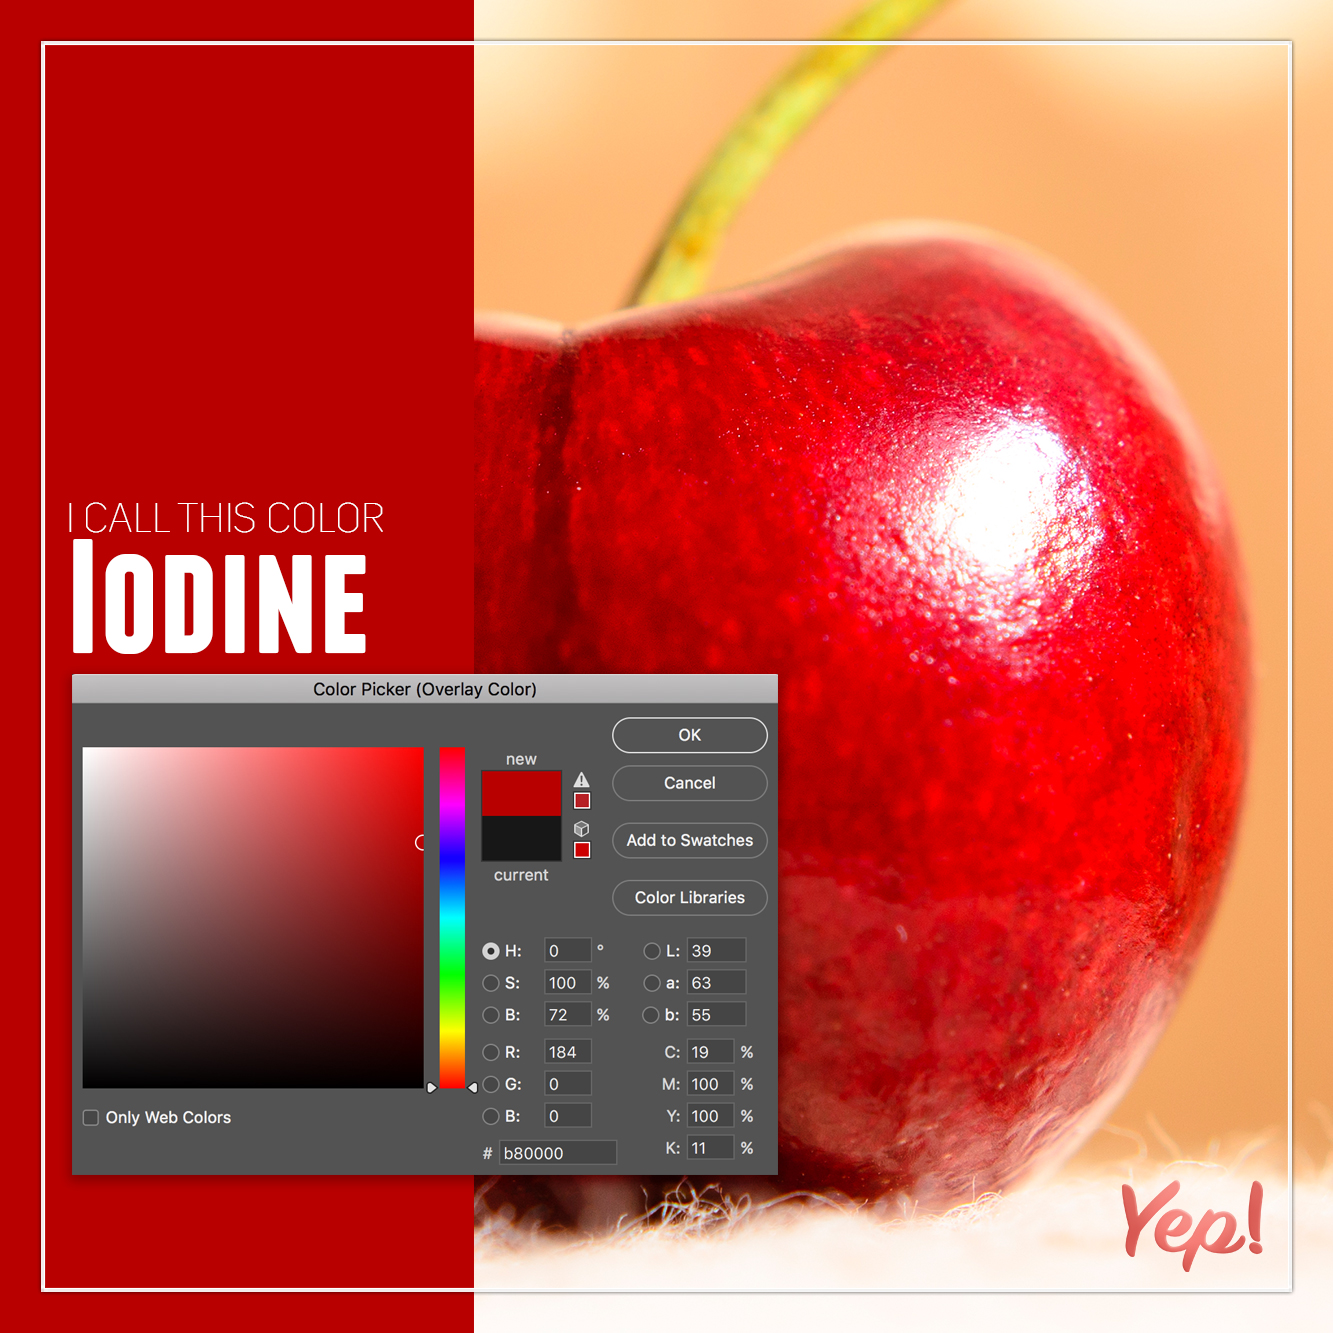 apple - I Call This Color Iodine Color Picker Overiay Colori Ok Add to Swiches Color Libraries Oh 0 . 39 S 1000 7 66 Ore 184 C 19 Go M100 Only Win Colors 180000 K 1 Yep!